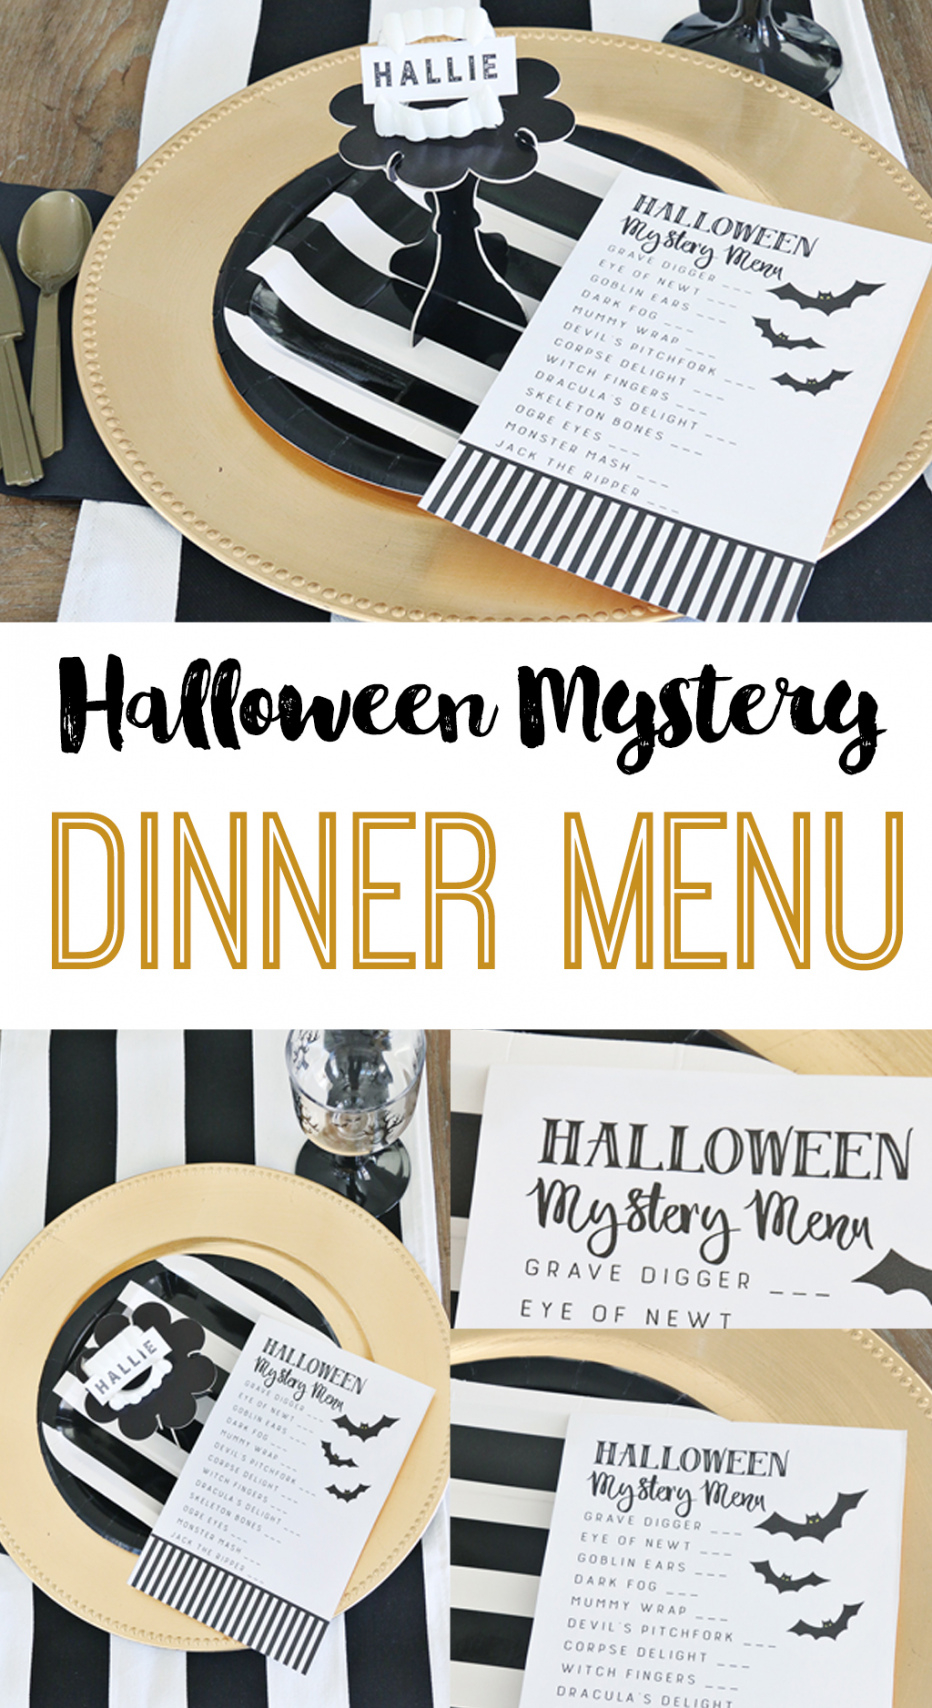 halloween mystery dinner party free menu  the crafting chicks mystery dinner menu template word